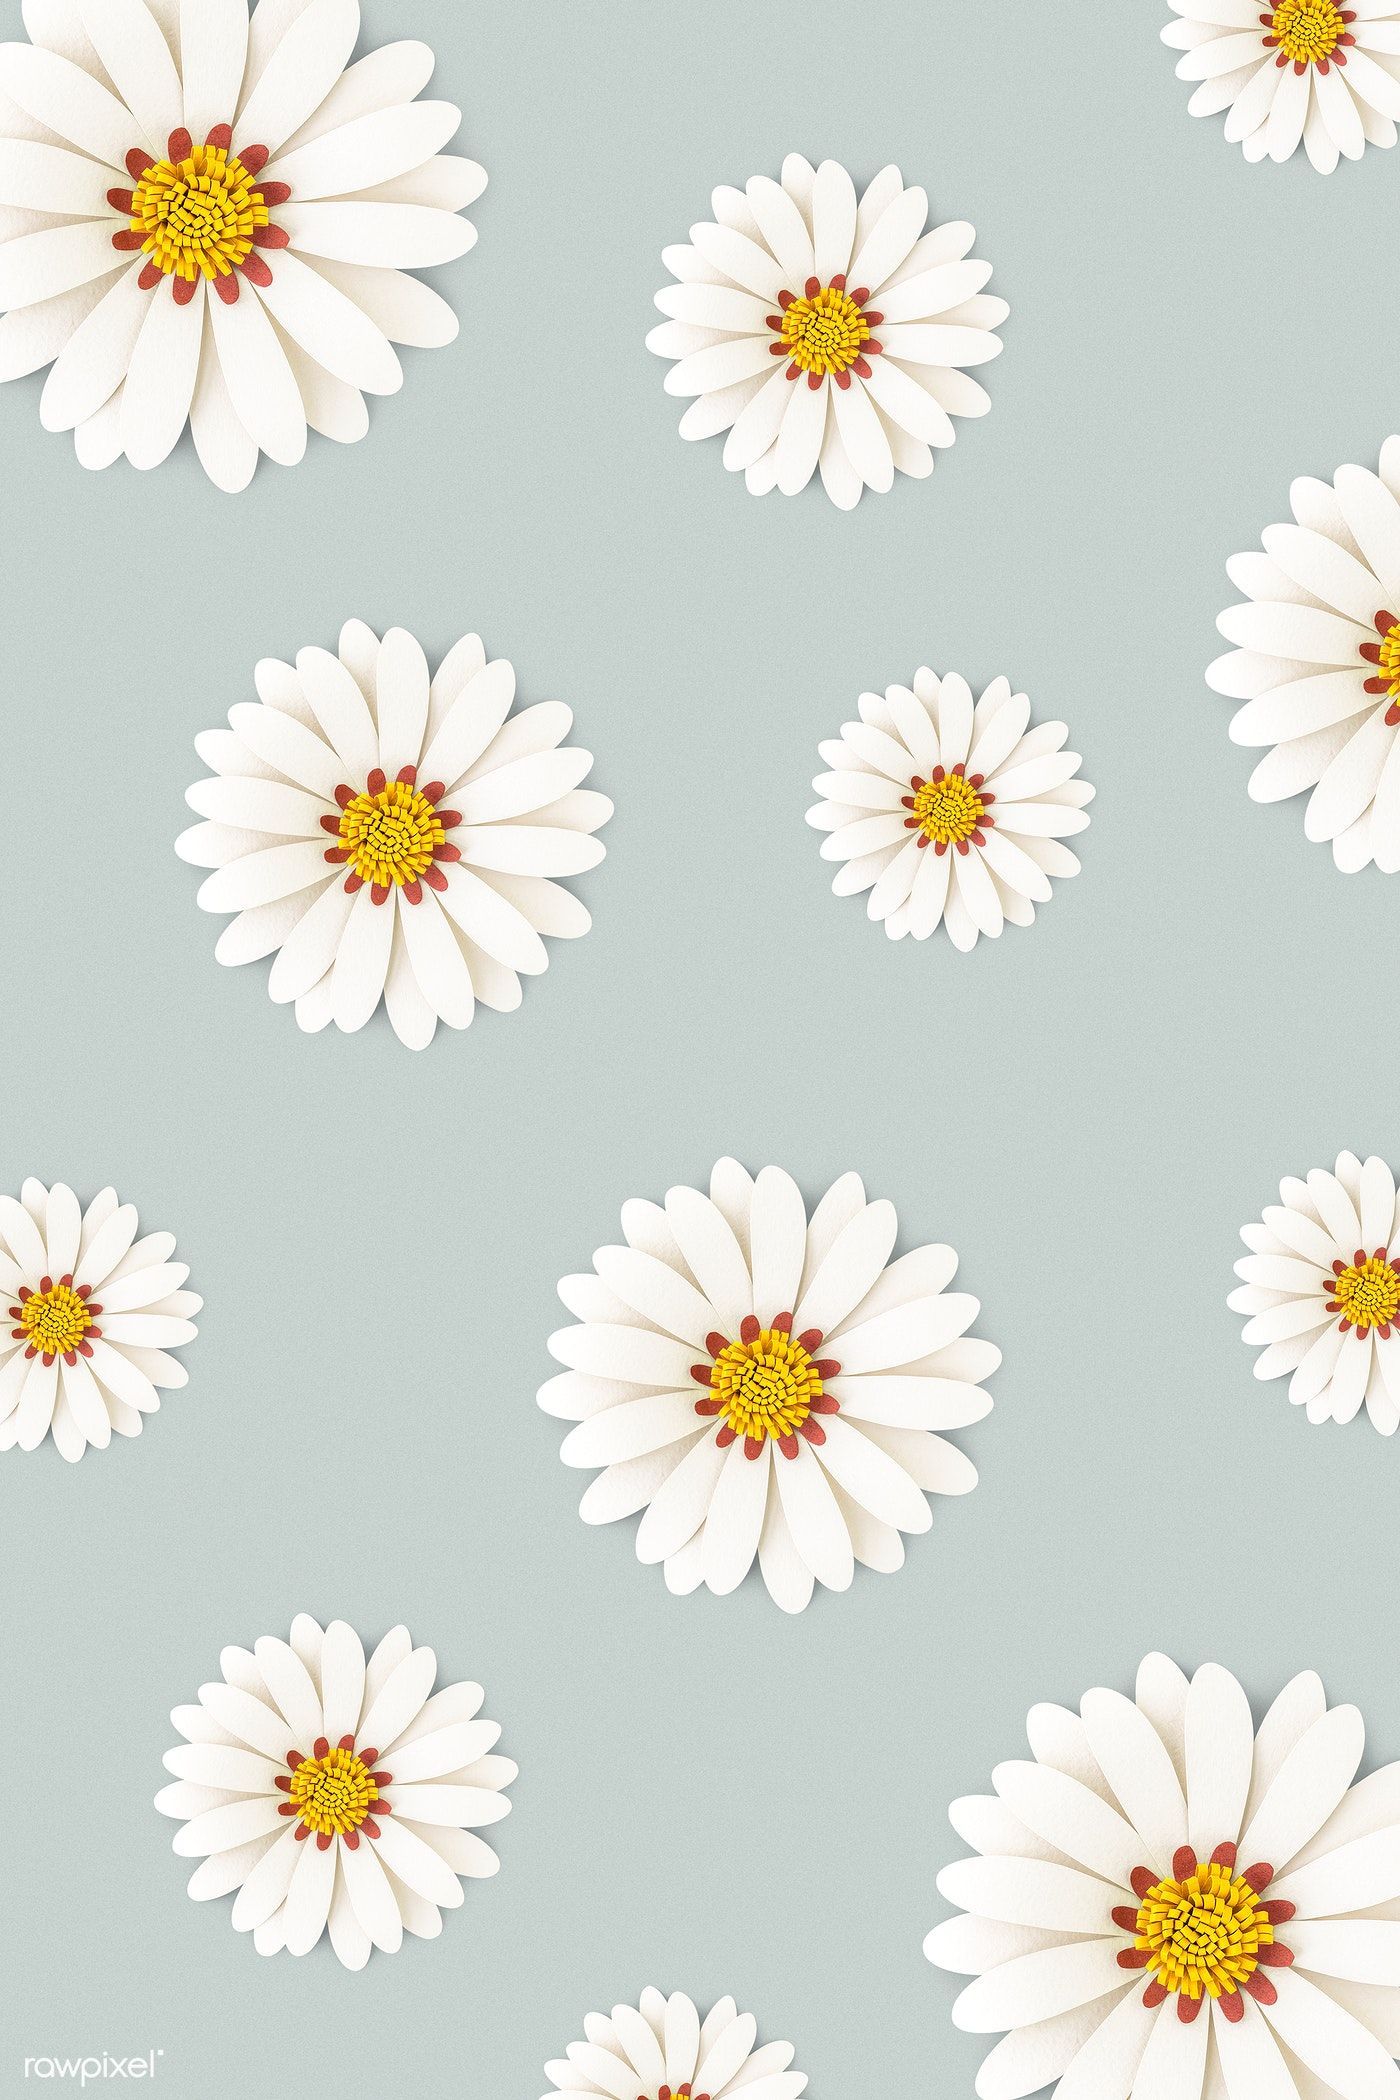 Daisy Iphone Wallpapers